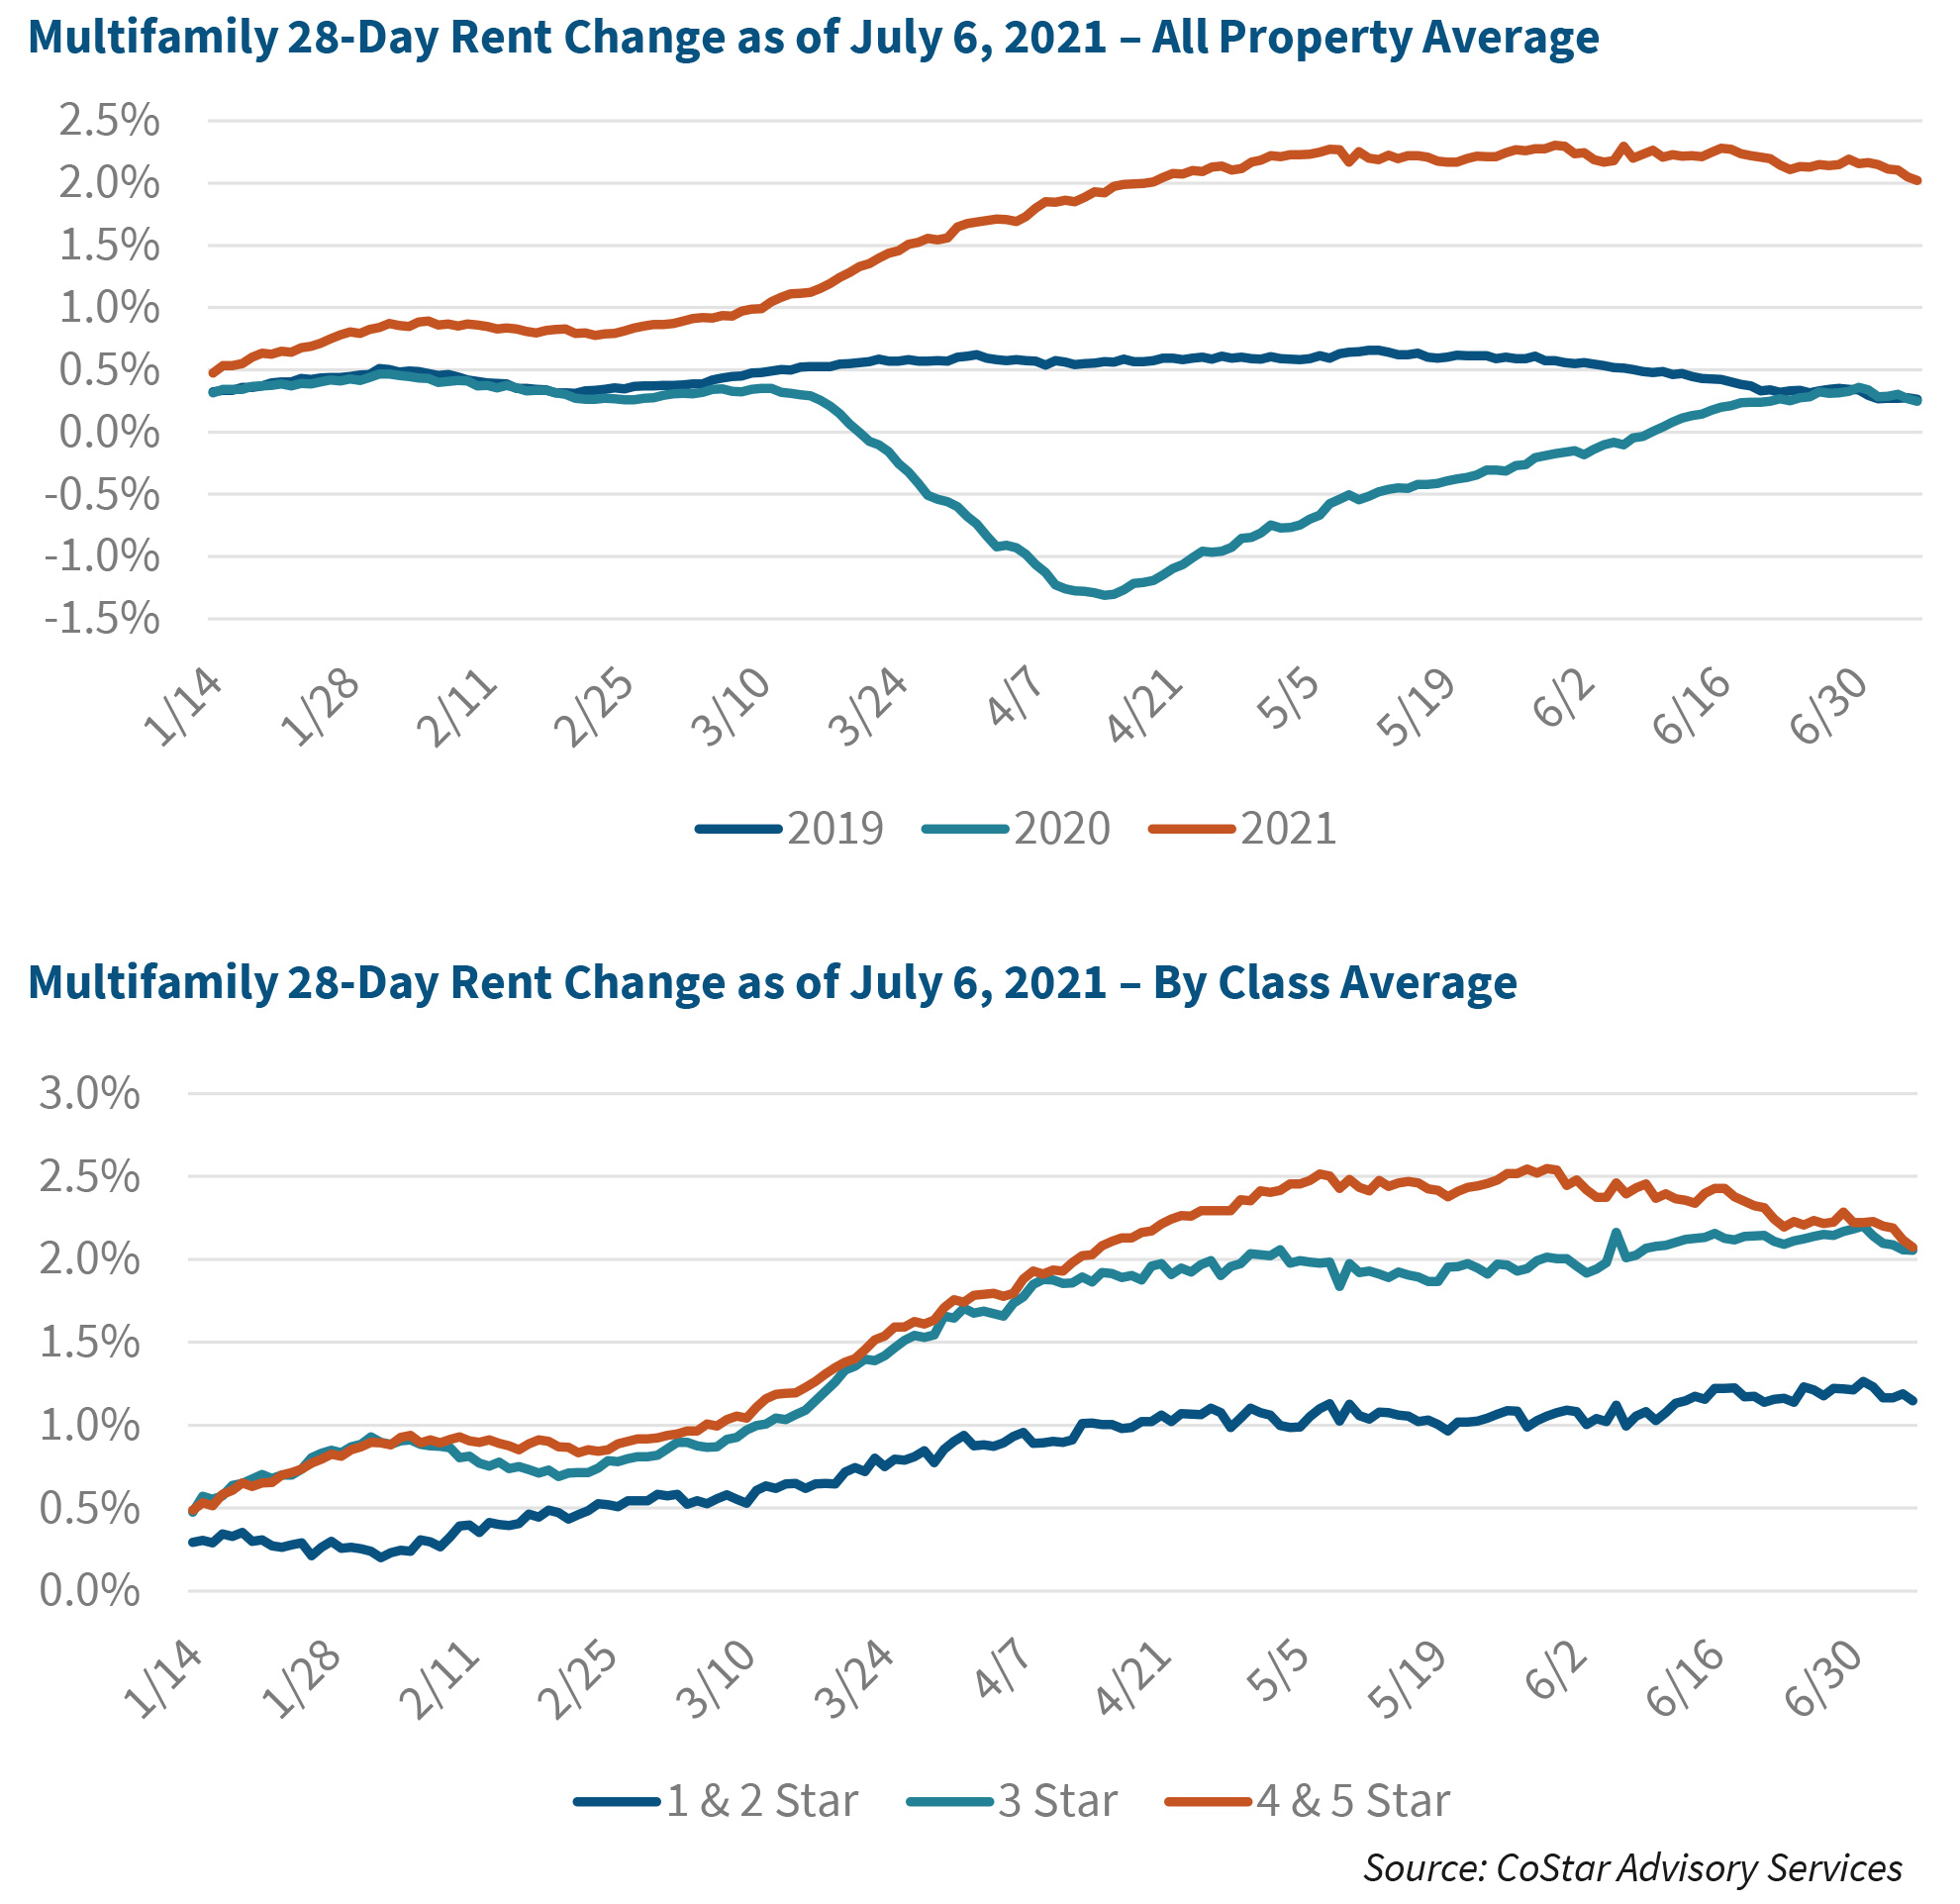 Multifamily 28-Day Rent Change as of July 6, 2021 – All Property Average | Multifamily 28-Day Rent Change as of July 6, 2021 – By Class Average